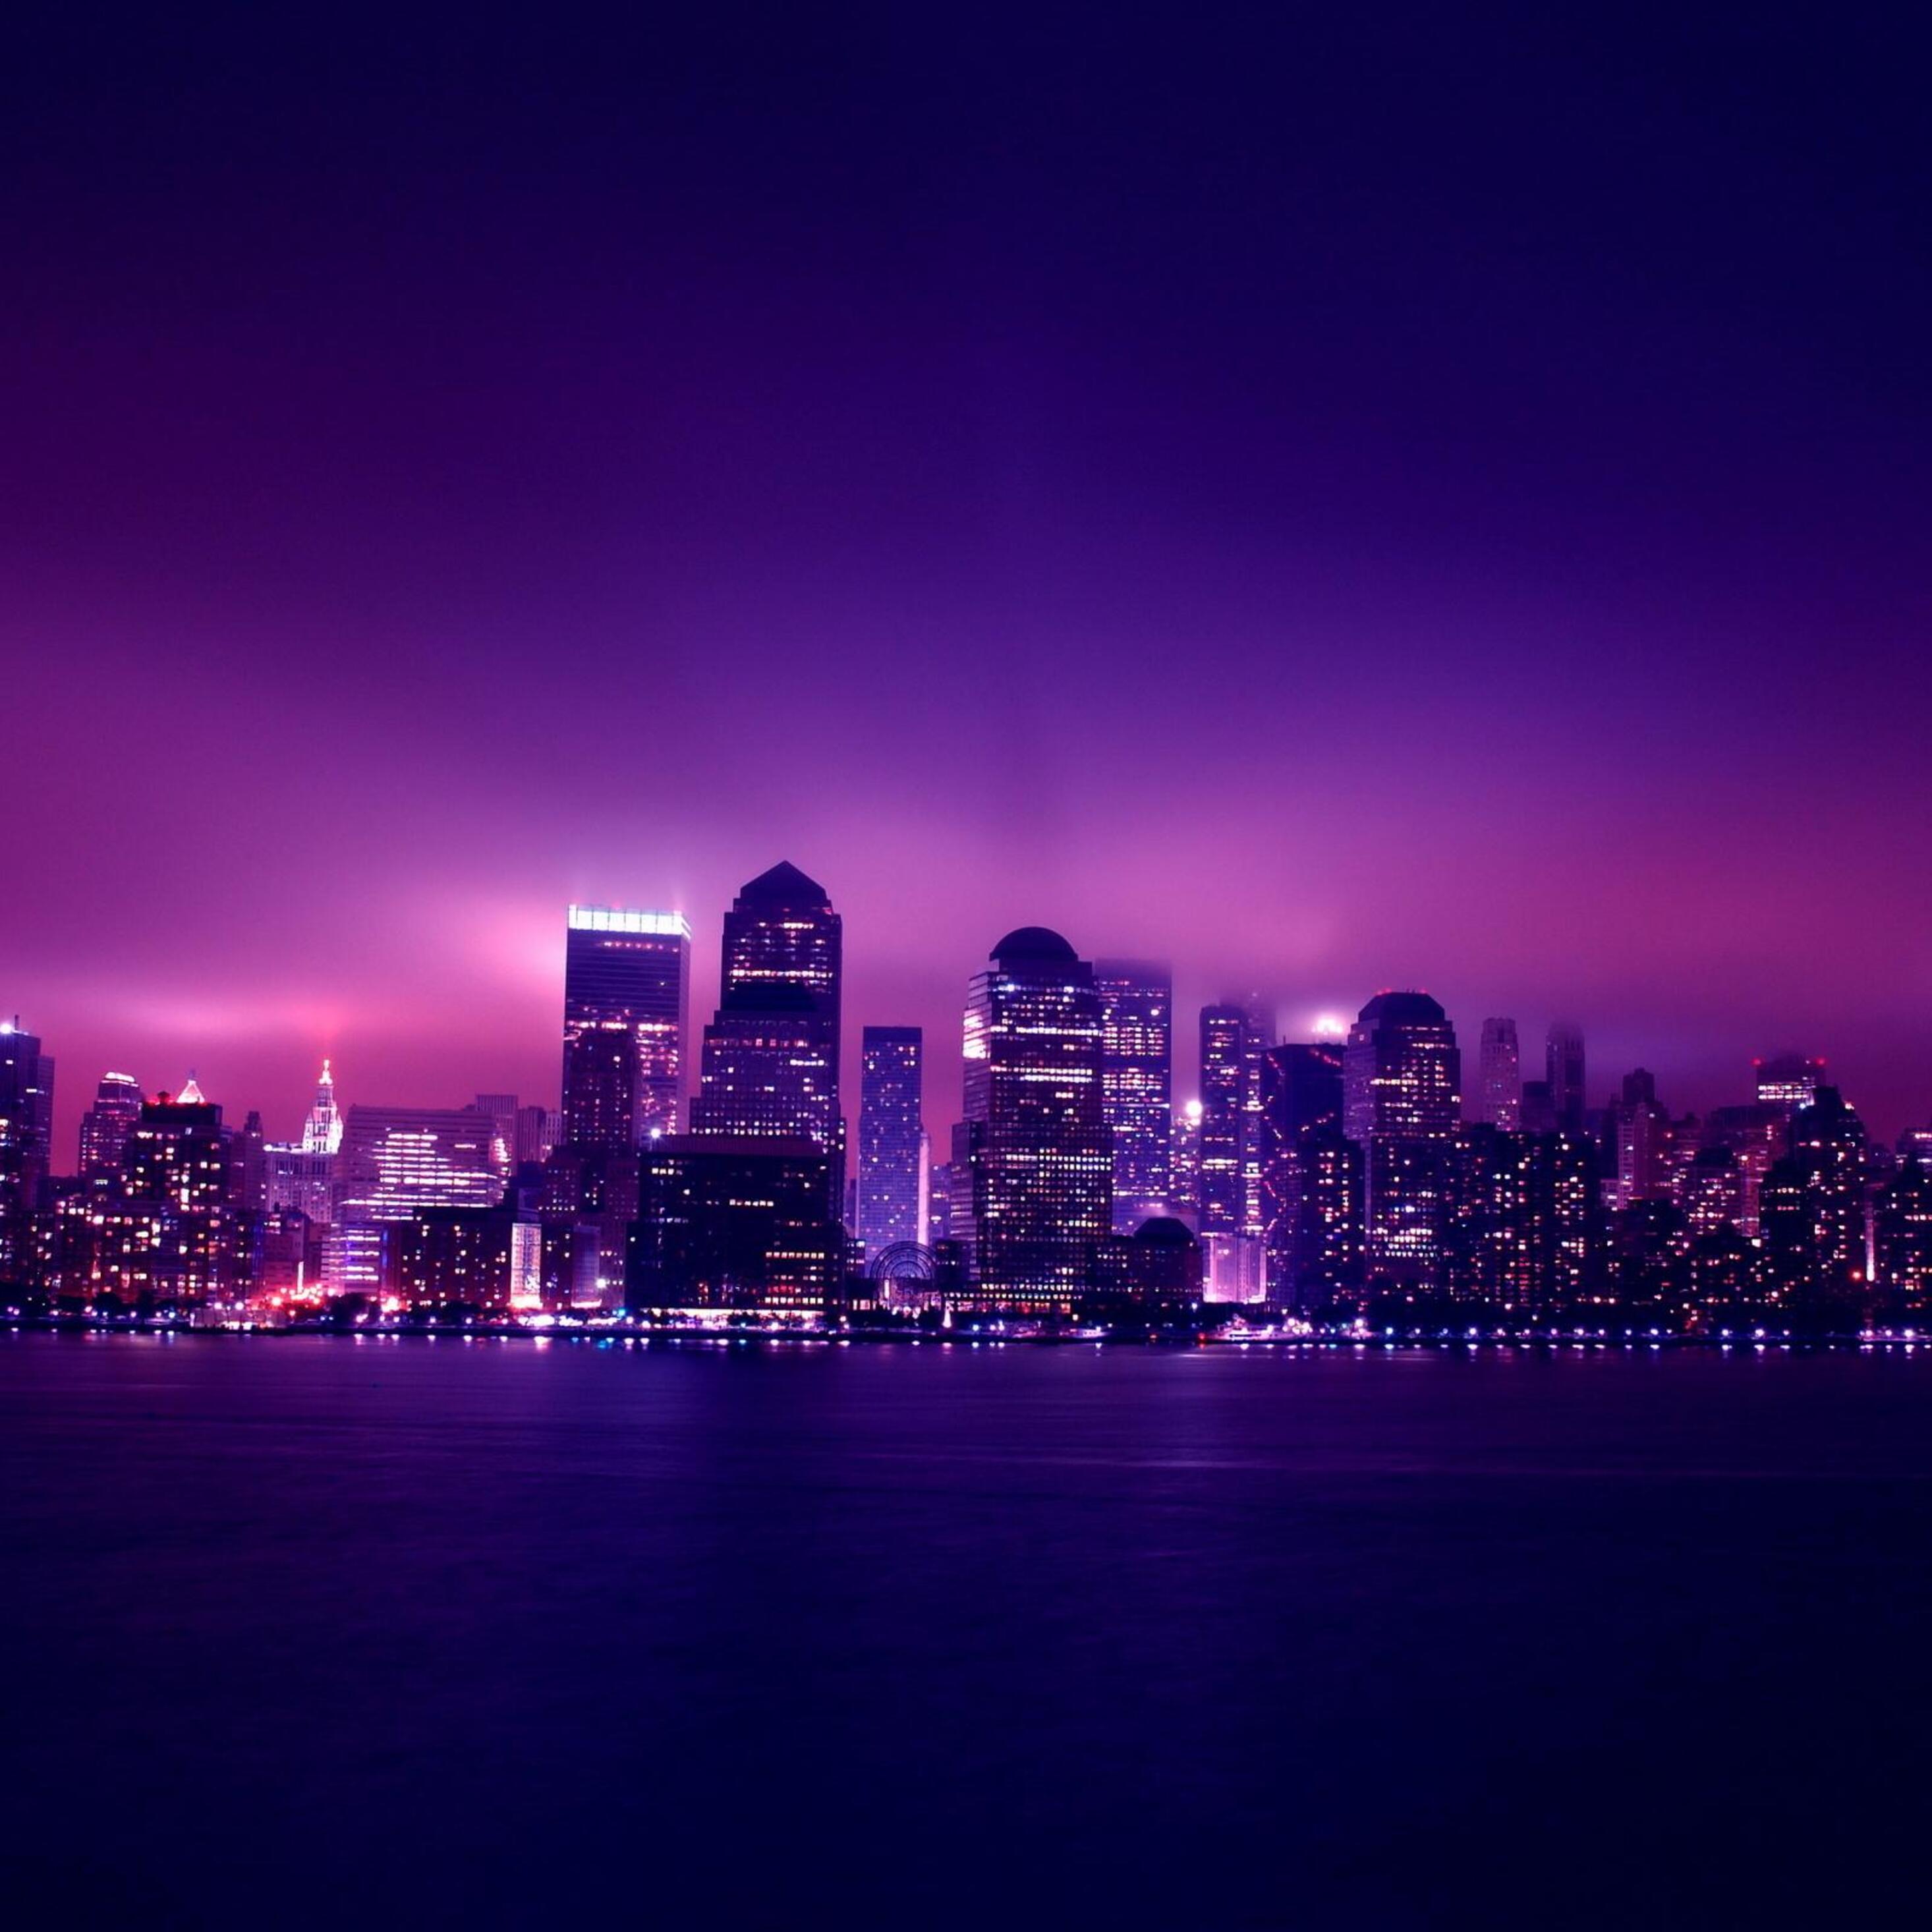 A purple and blue cityscape wallpaper with a purple sky - City